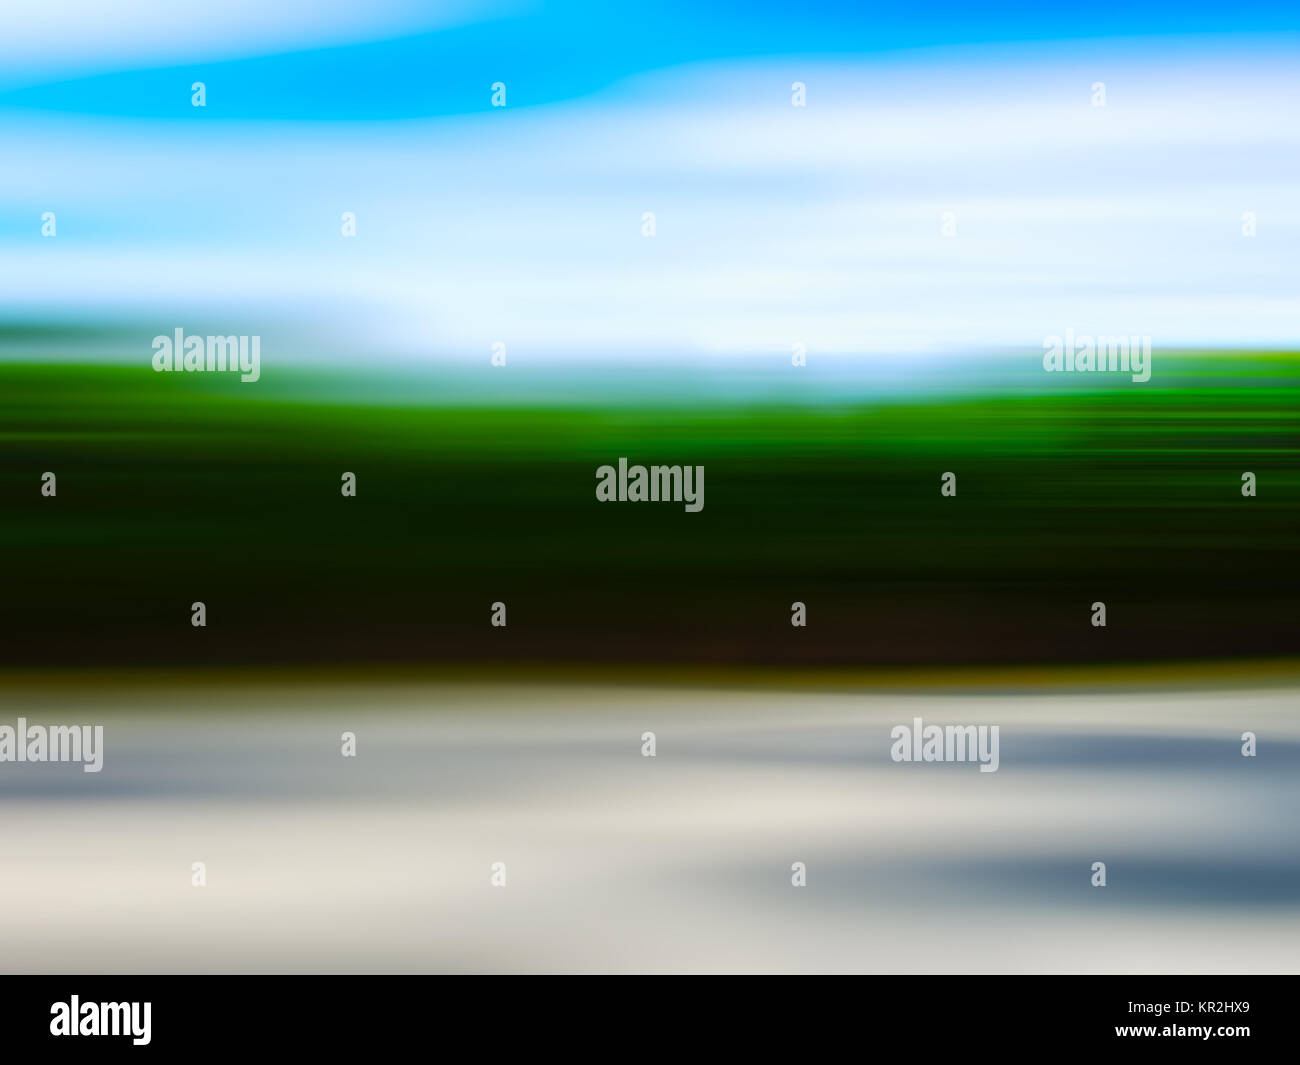 Horizontal blurry abstract happy landscape background backdrop Stock Photo